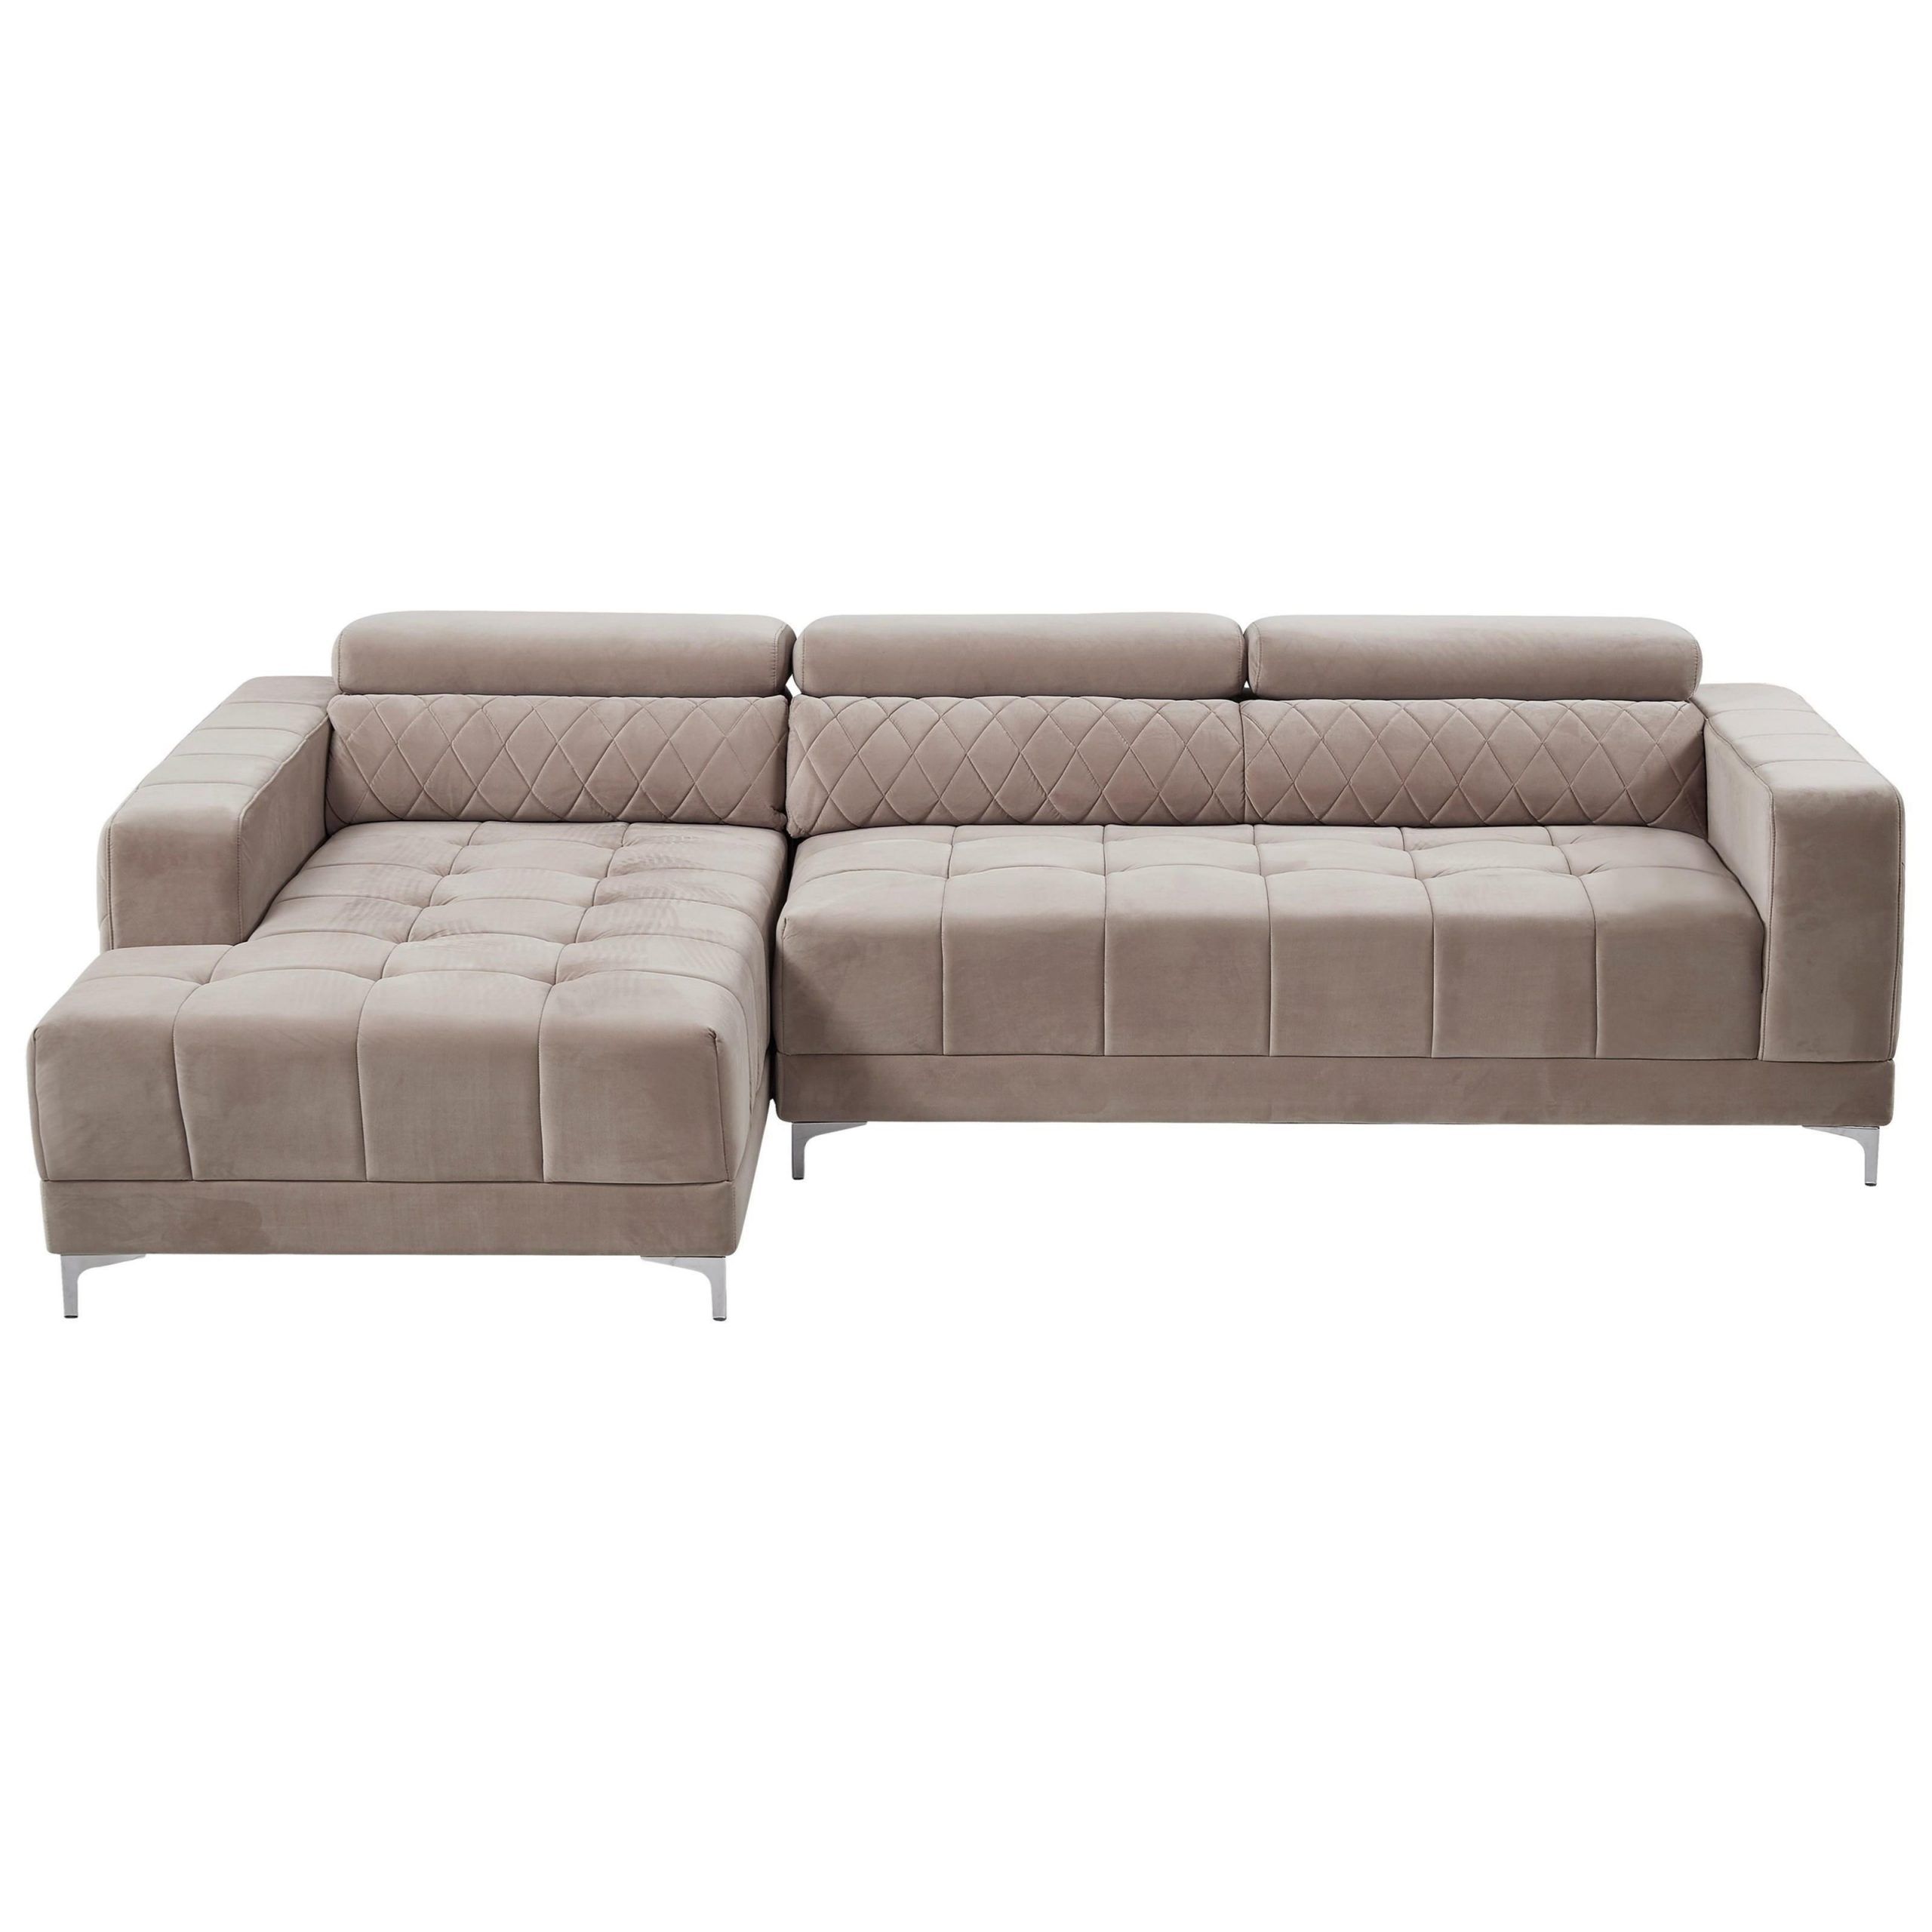 Favorite Global Furniture U0037 Contemporary 2 Piece Sectional With With Regard To 2pc Burland Contemporary Sectional Sofas Charcoal (View 5 of 25)